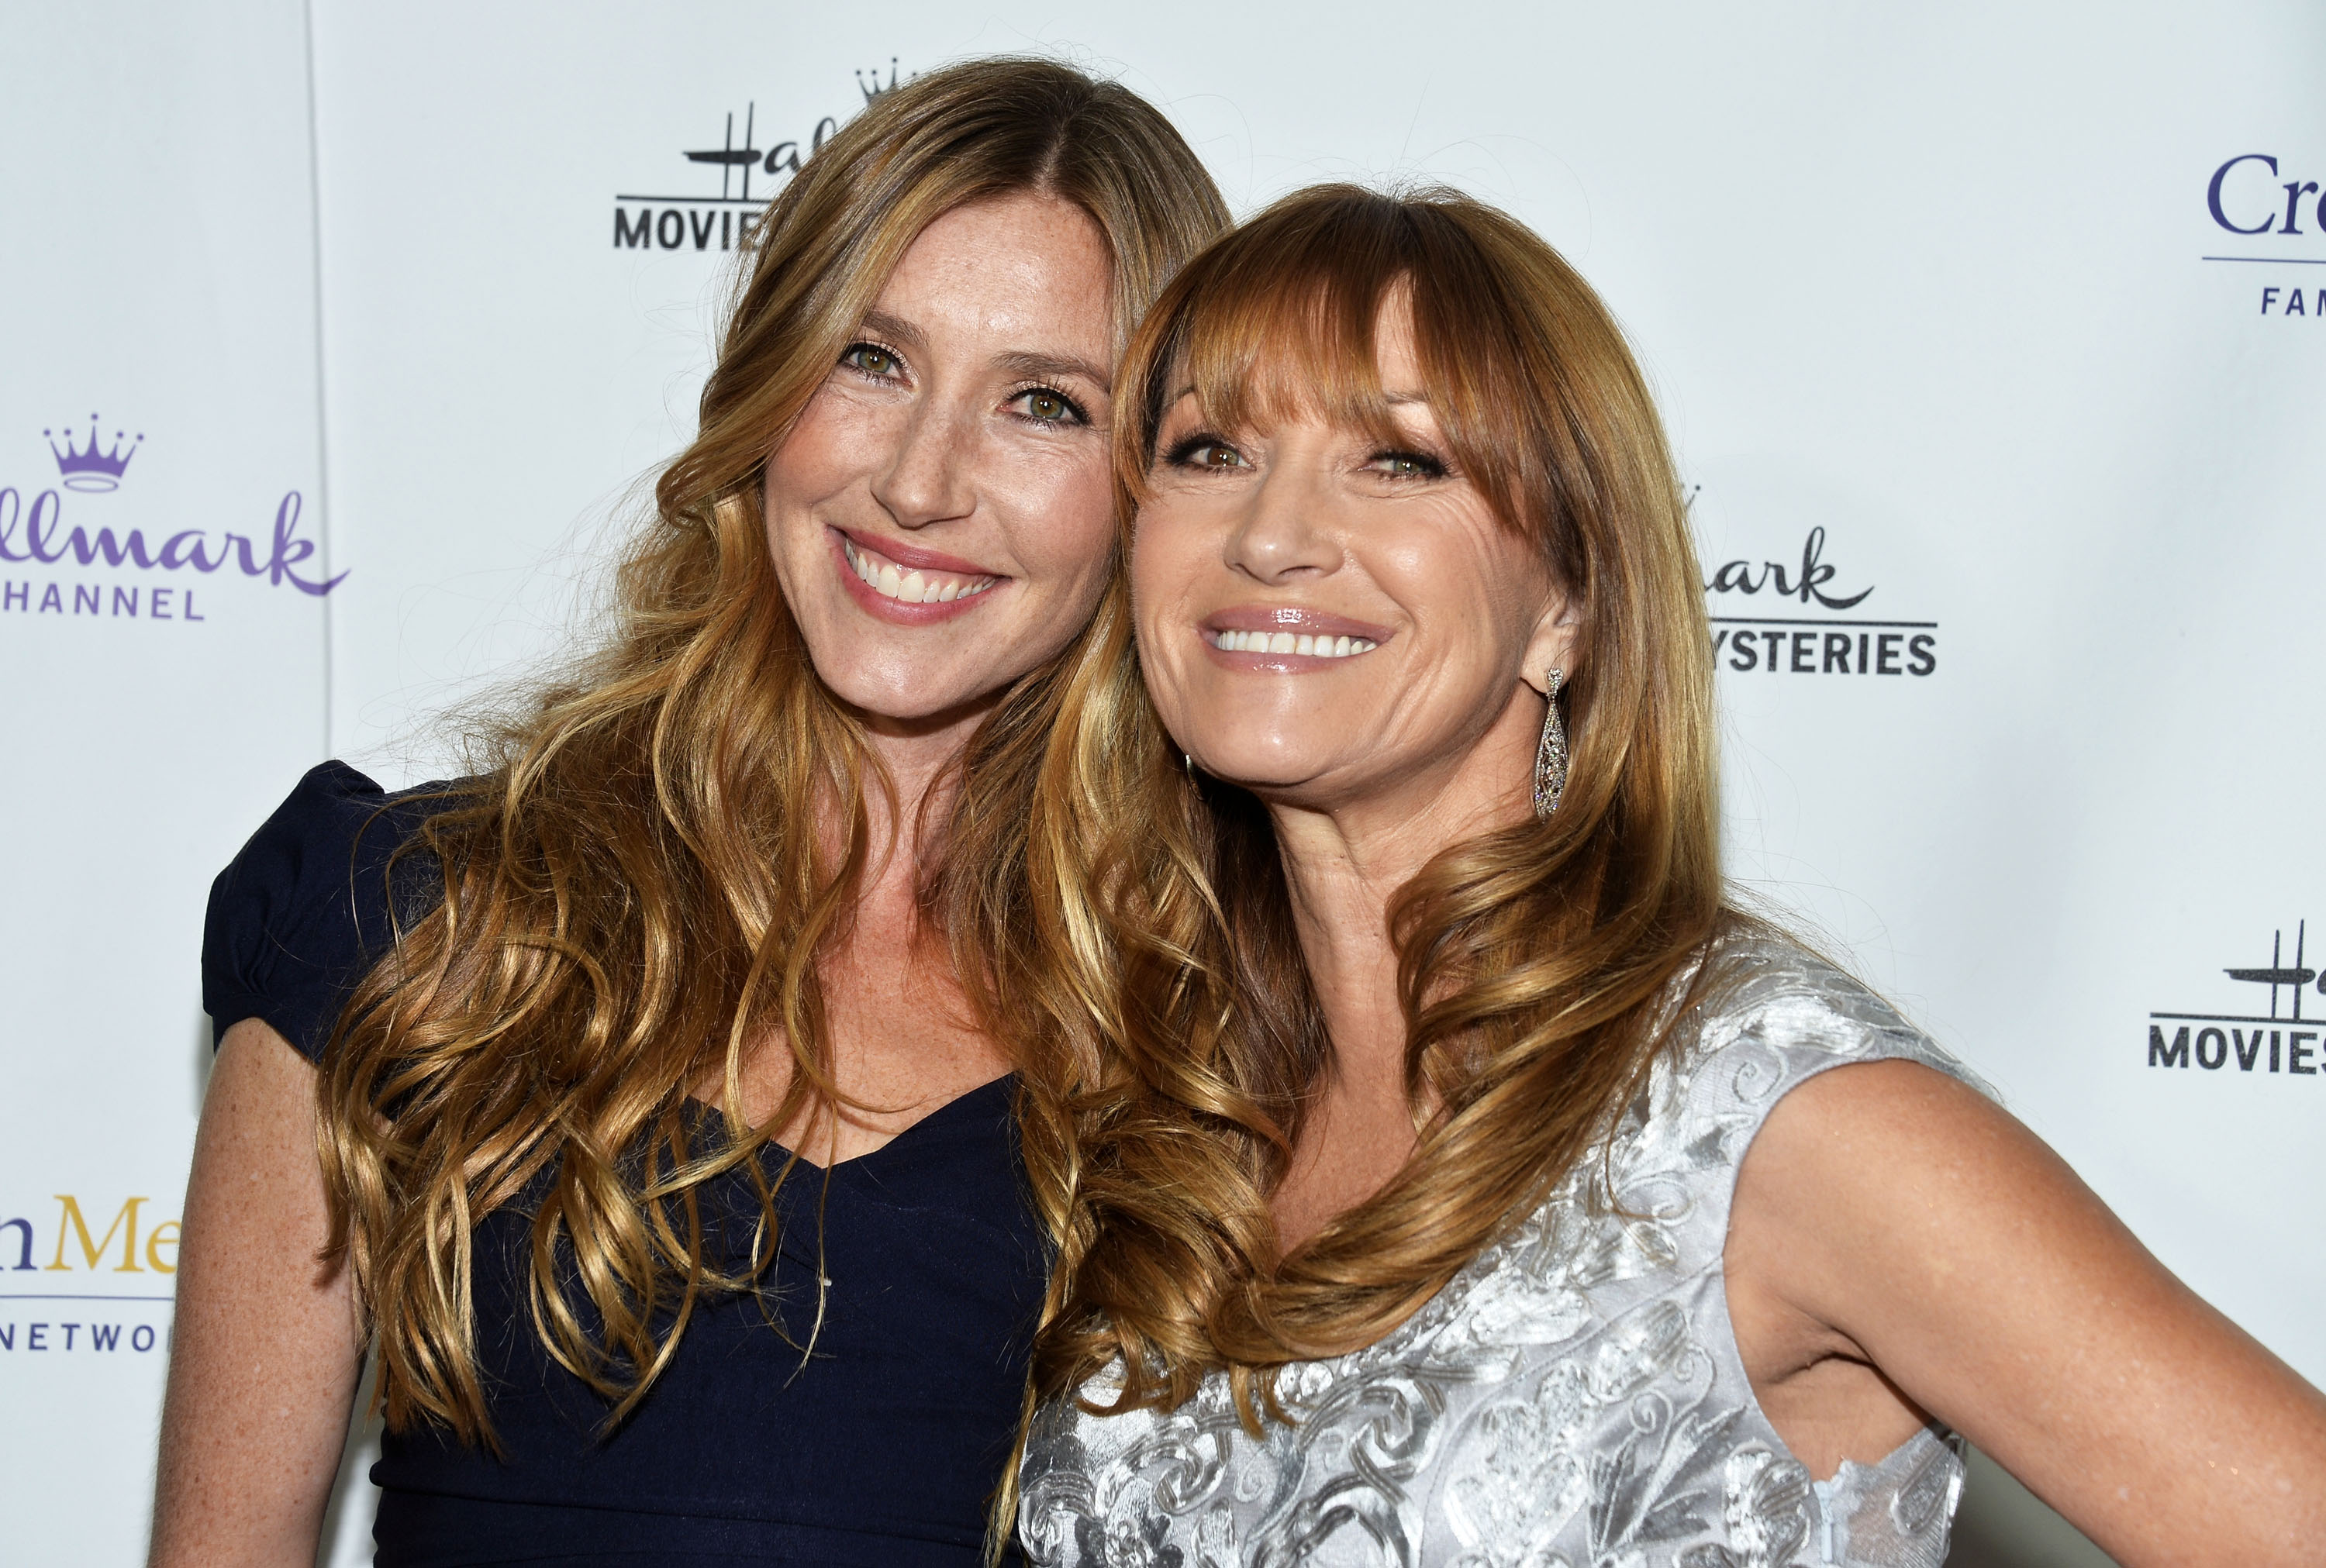 Katherine Flynn and Jane Seymour at the Hallmark Channel's Holiday Christmas world premiere screening of "Northpole" in Los Angeles, California on November 4, 2014. | Source: Getty Images